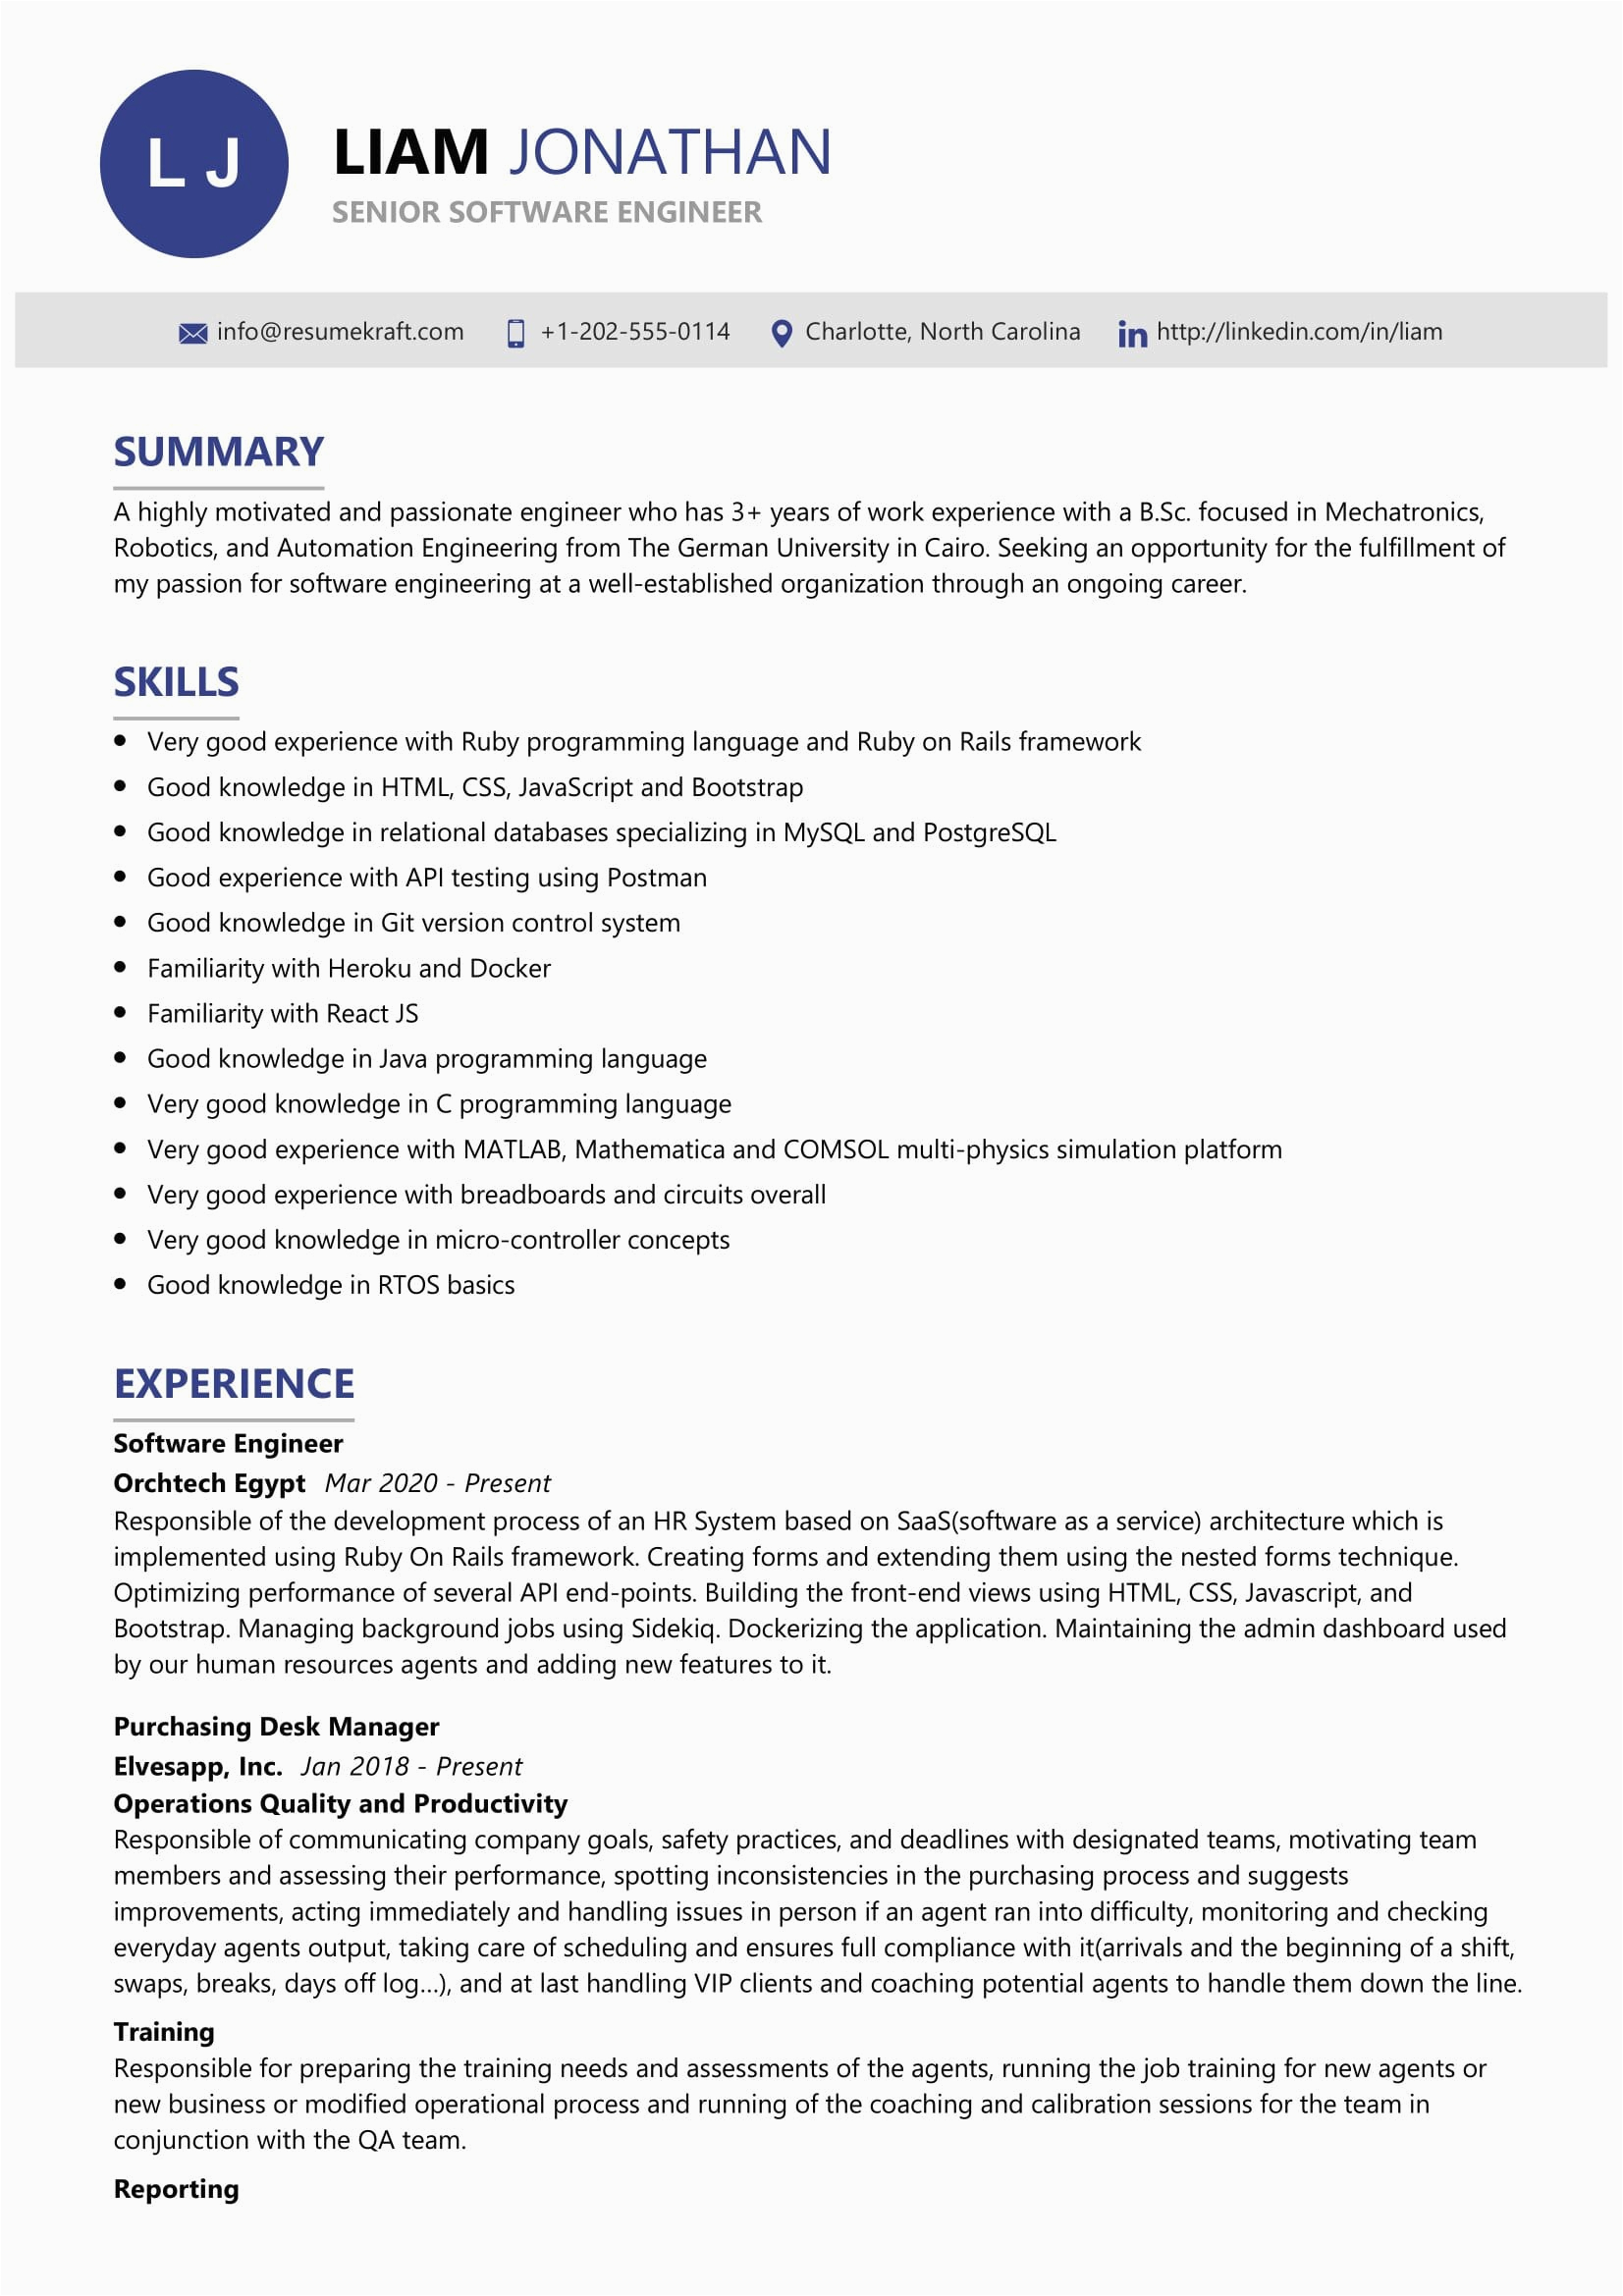 Sample Resume format for Experienced software Engineer Senior software Engineer Resume Sample Resumekraft